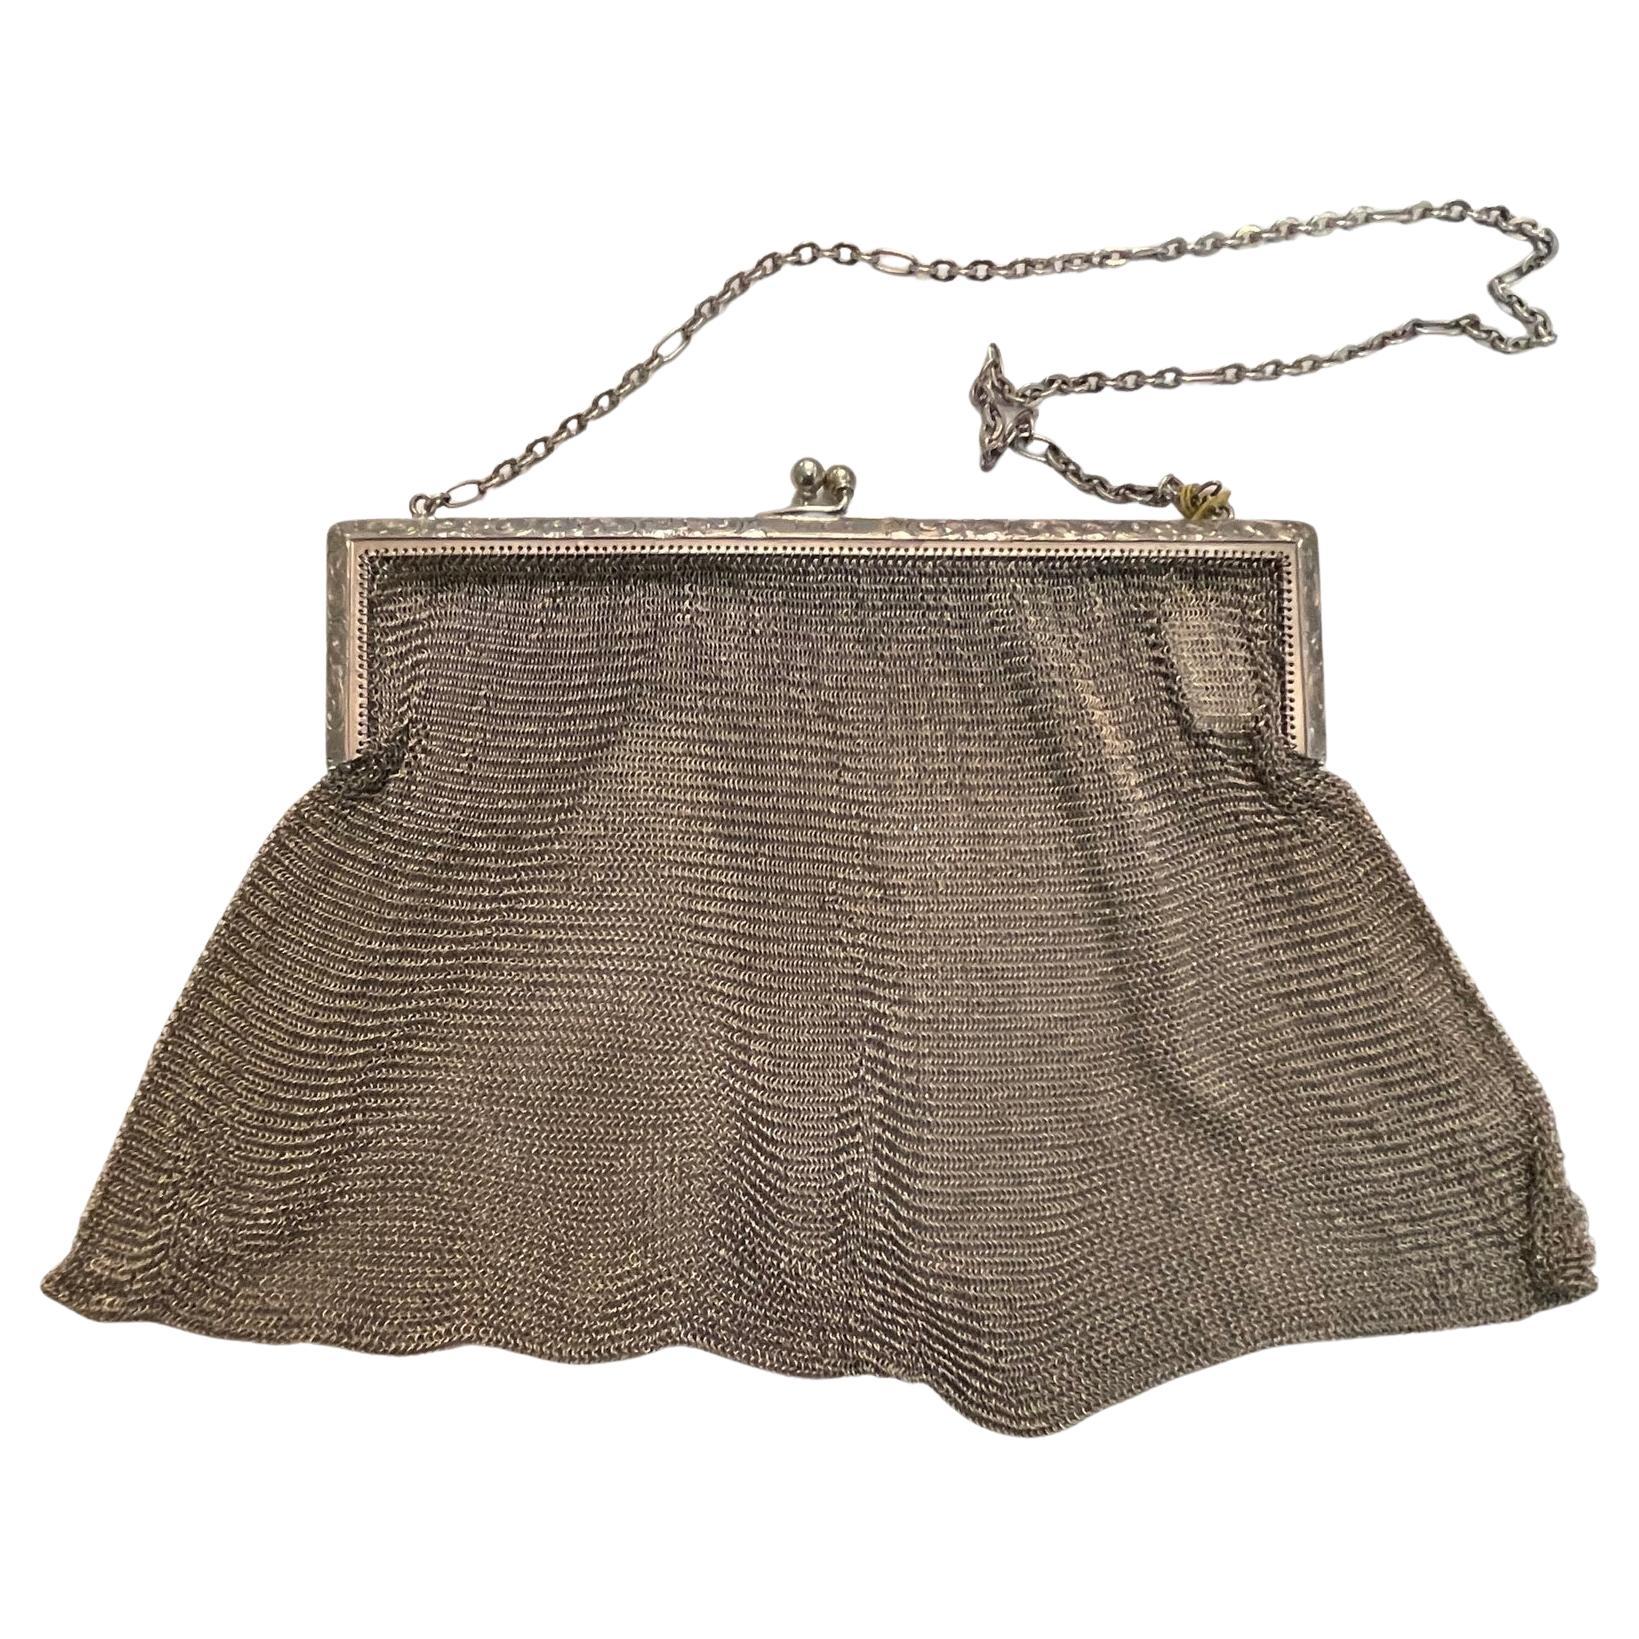 Sterling Silver Mesh Purse with Hand Engraved Frame, circa 1900s